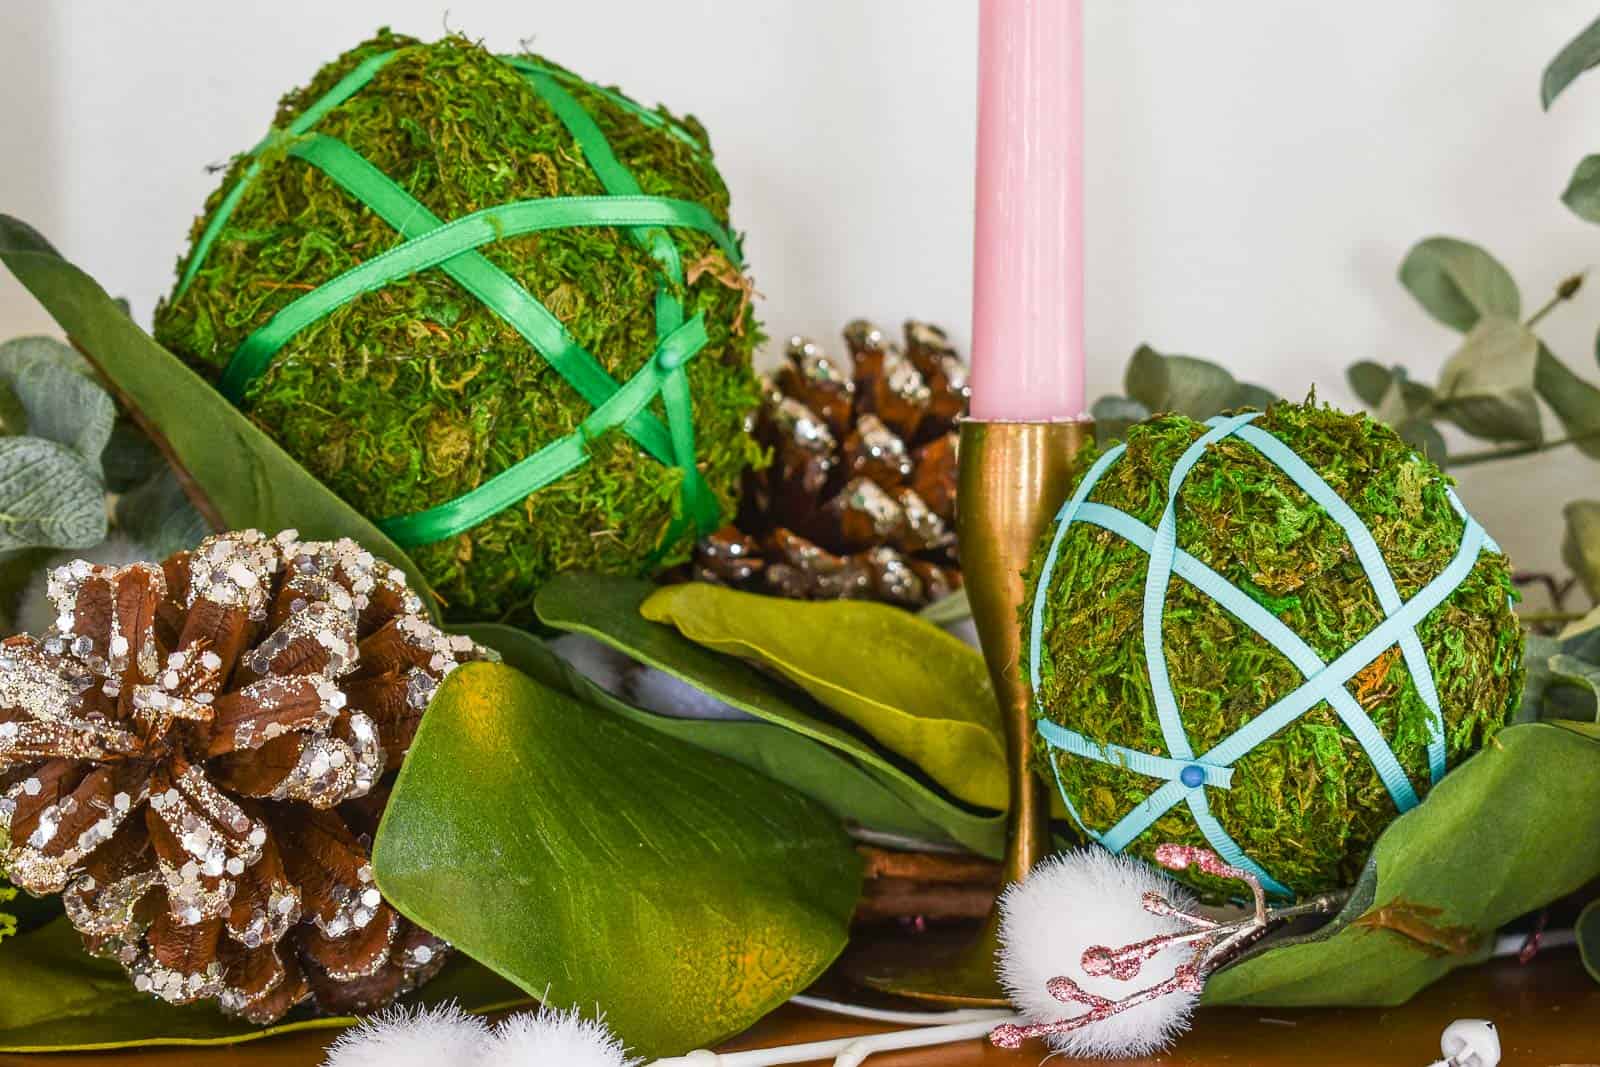 DIY colorful wrapped moss balls